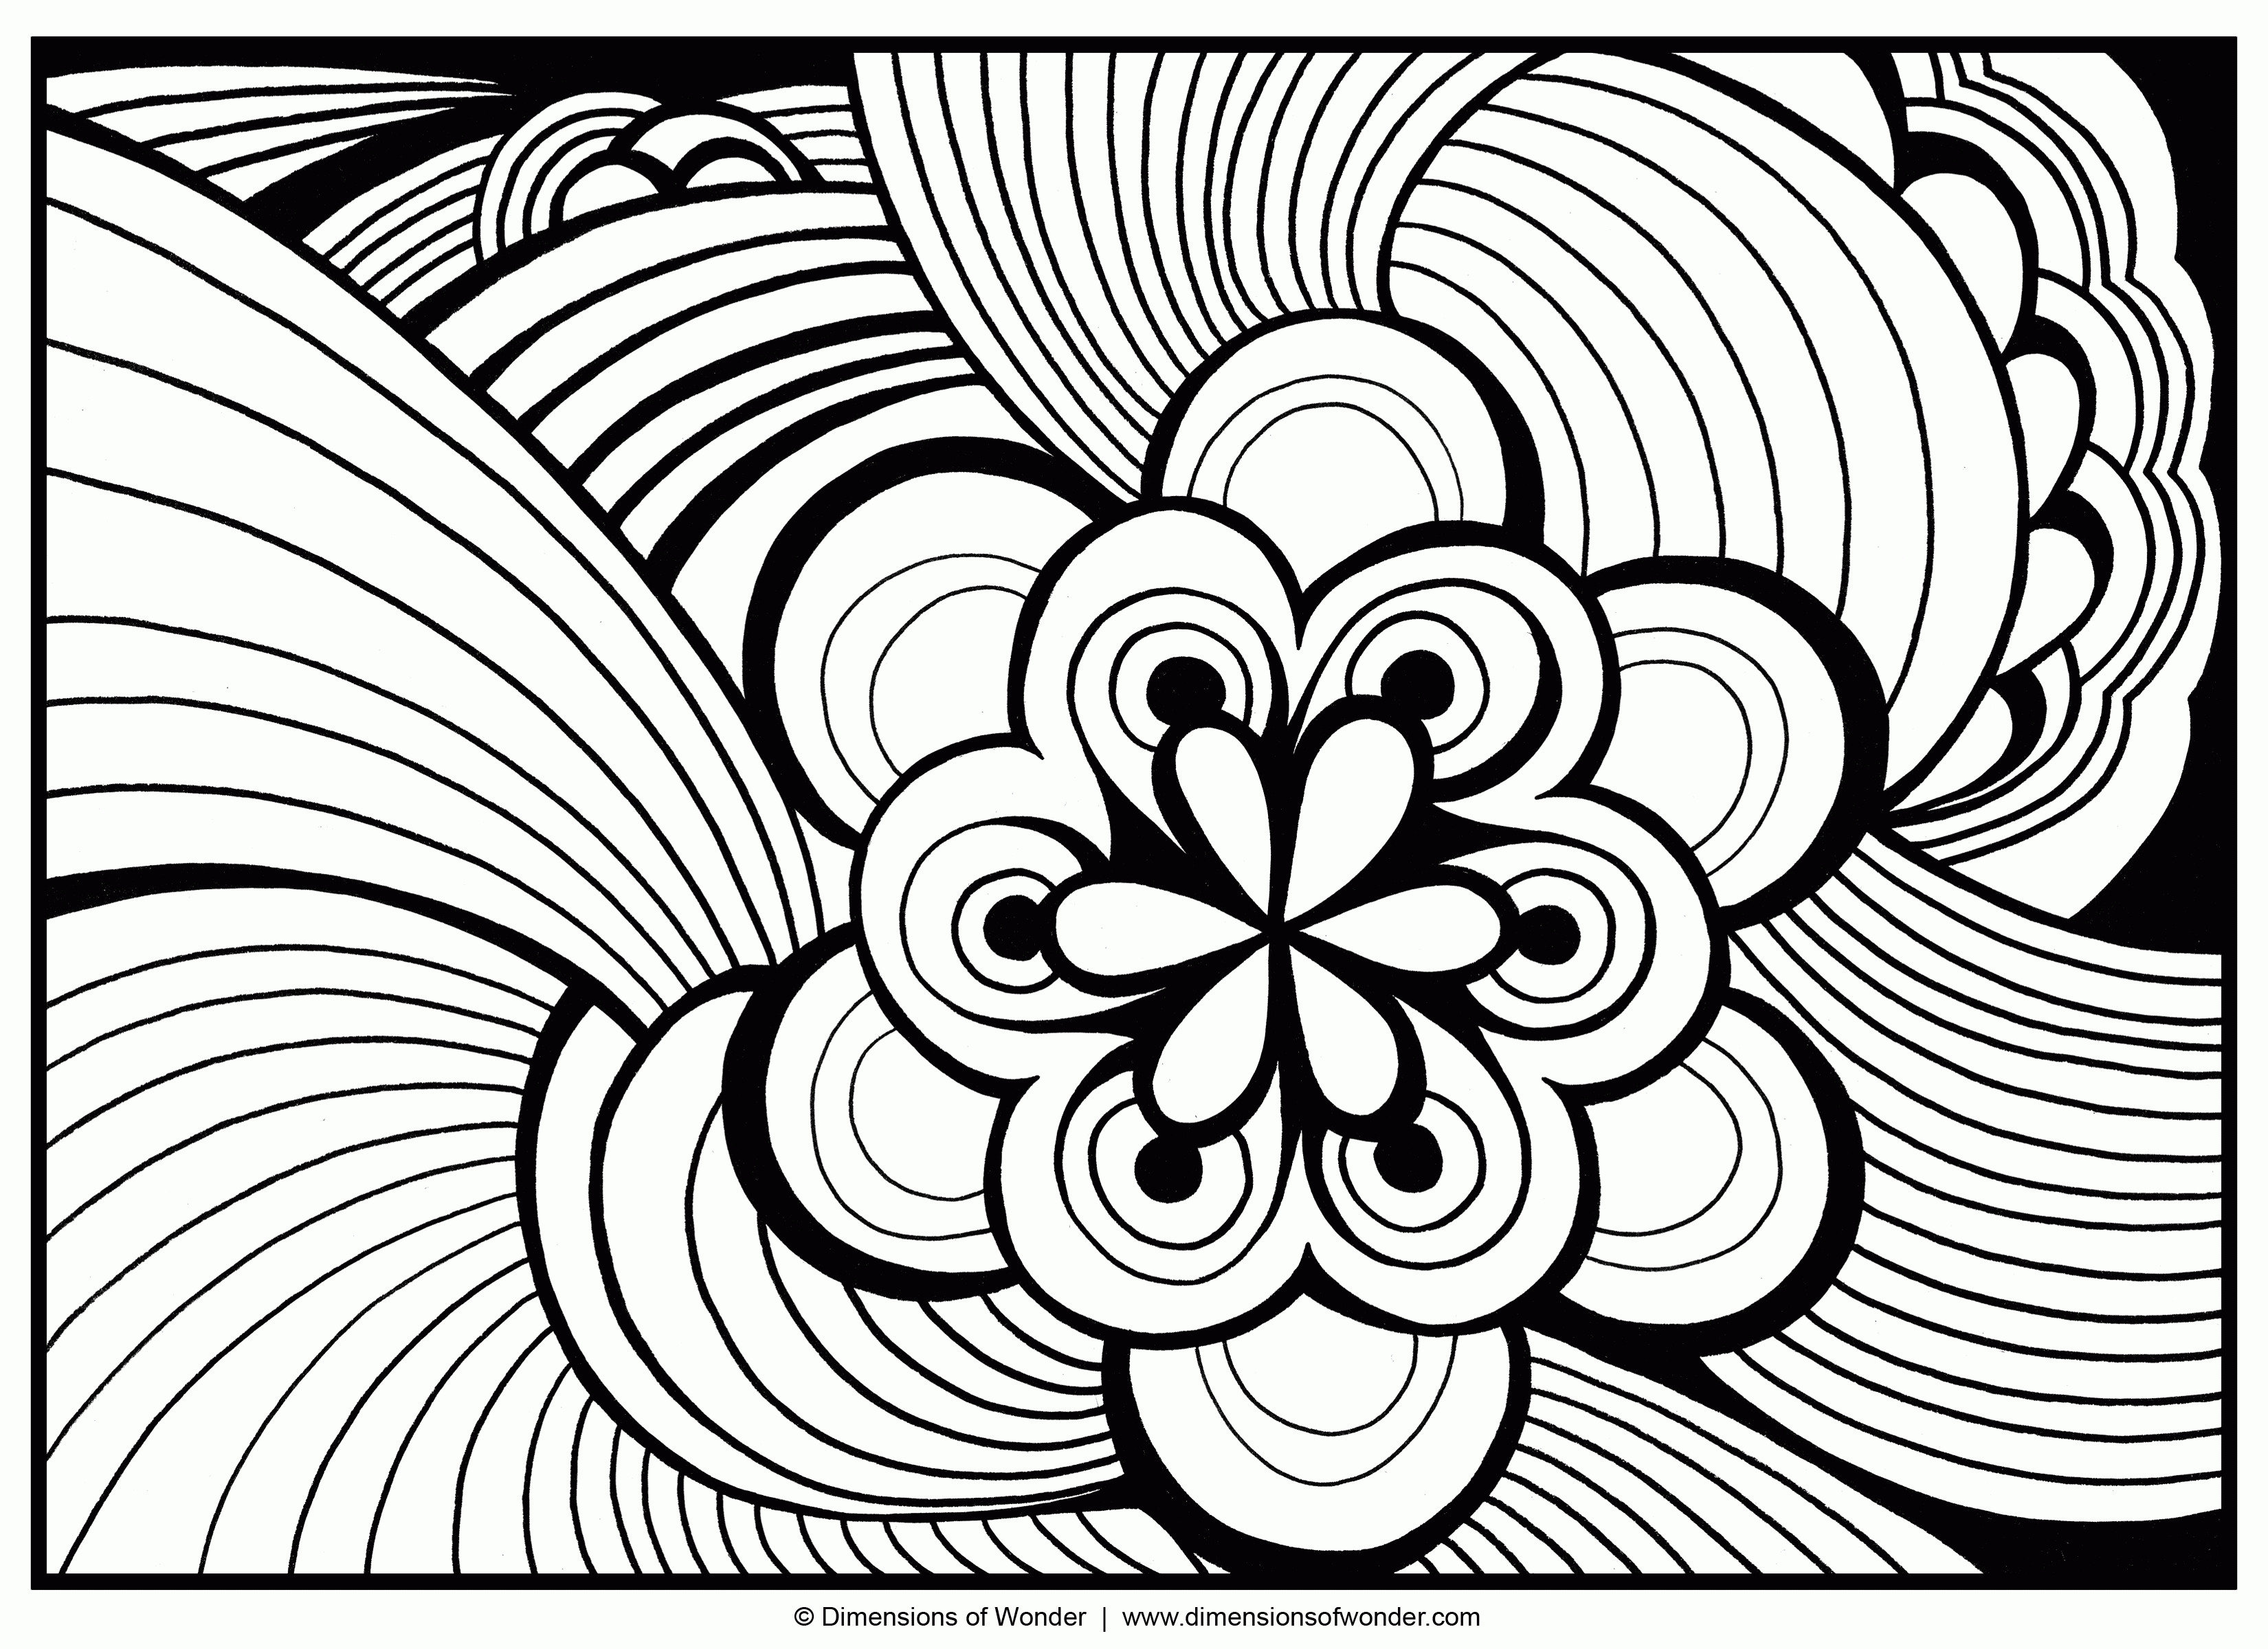 abstract adult colouring pages | Only Coloring Pages